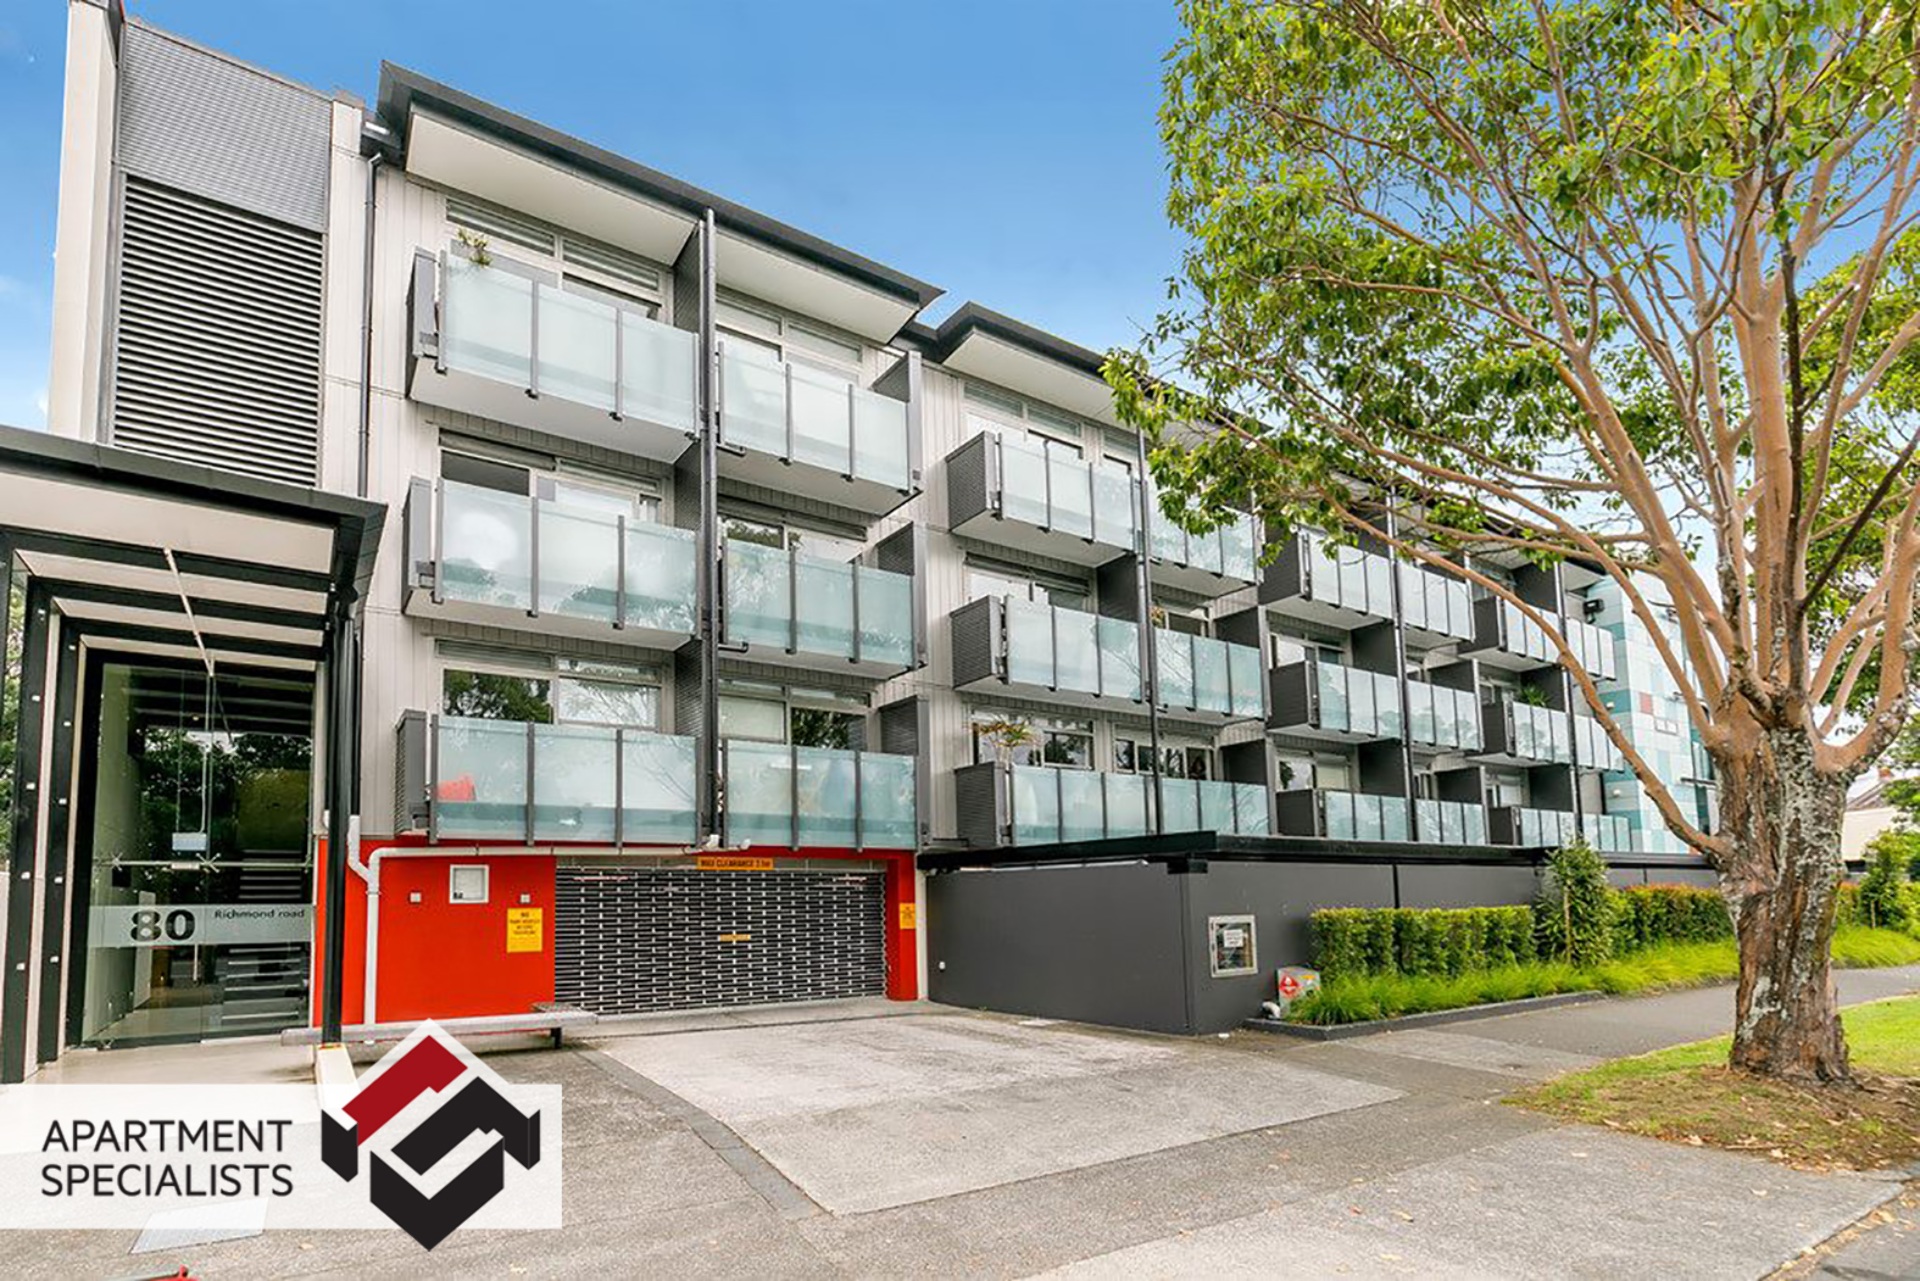 2 | 80 Richmond Road, Ponsonby | Apartment Specialists